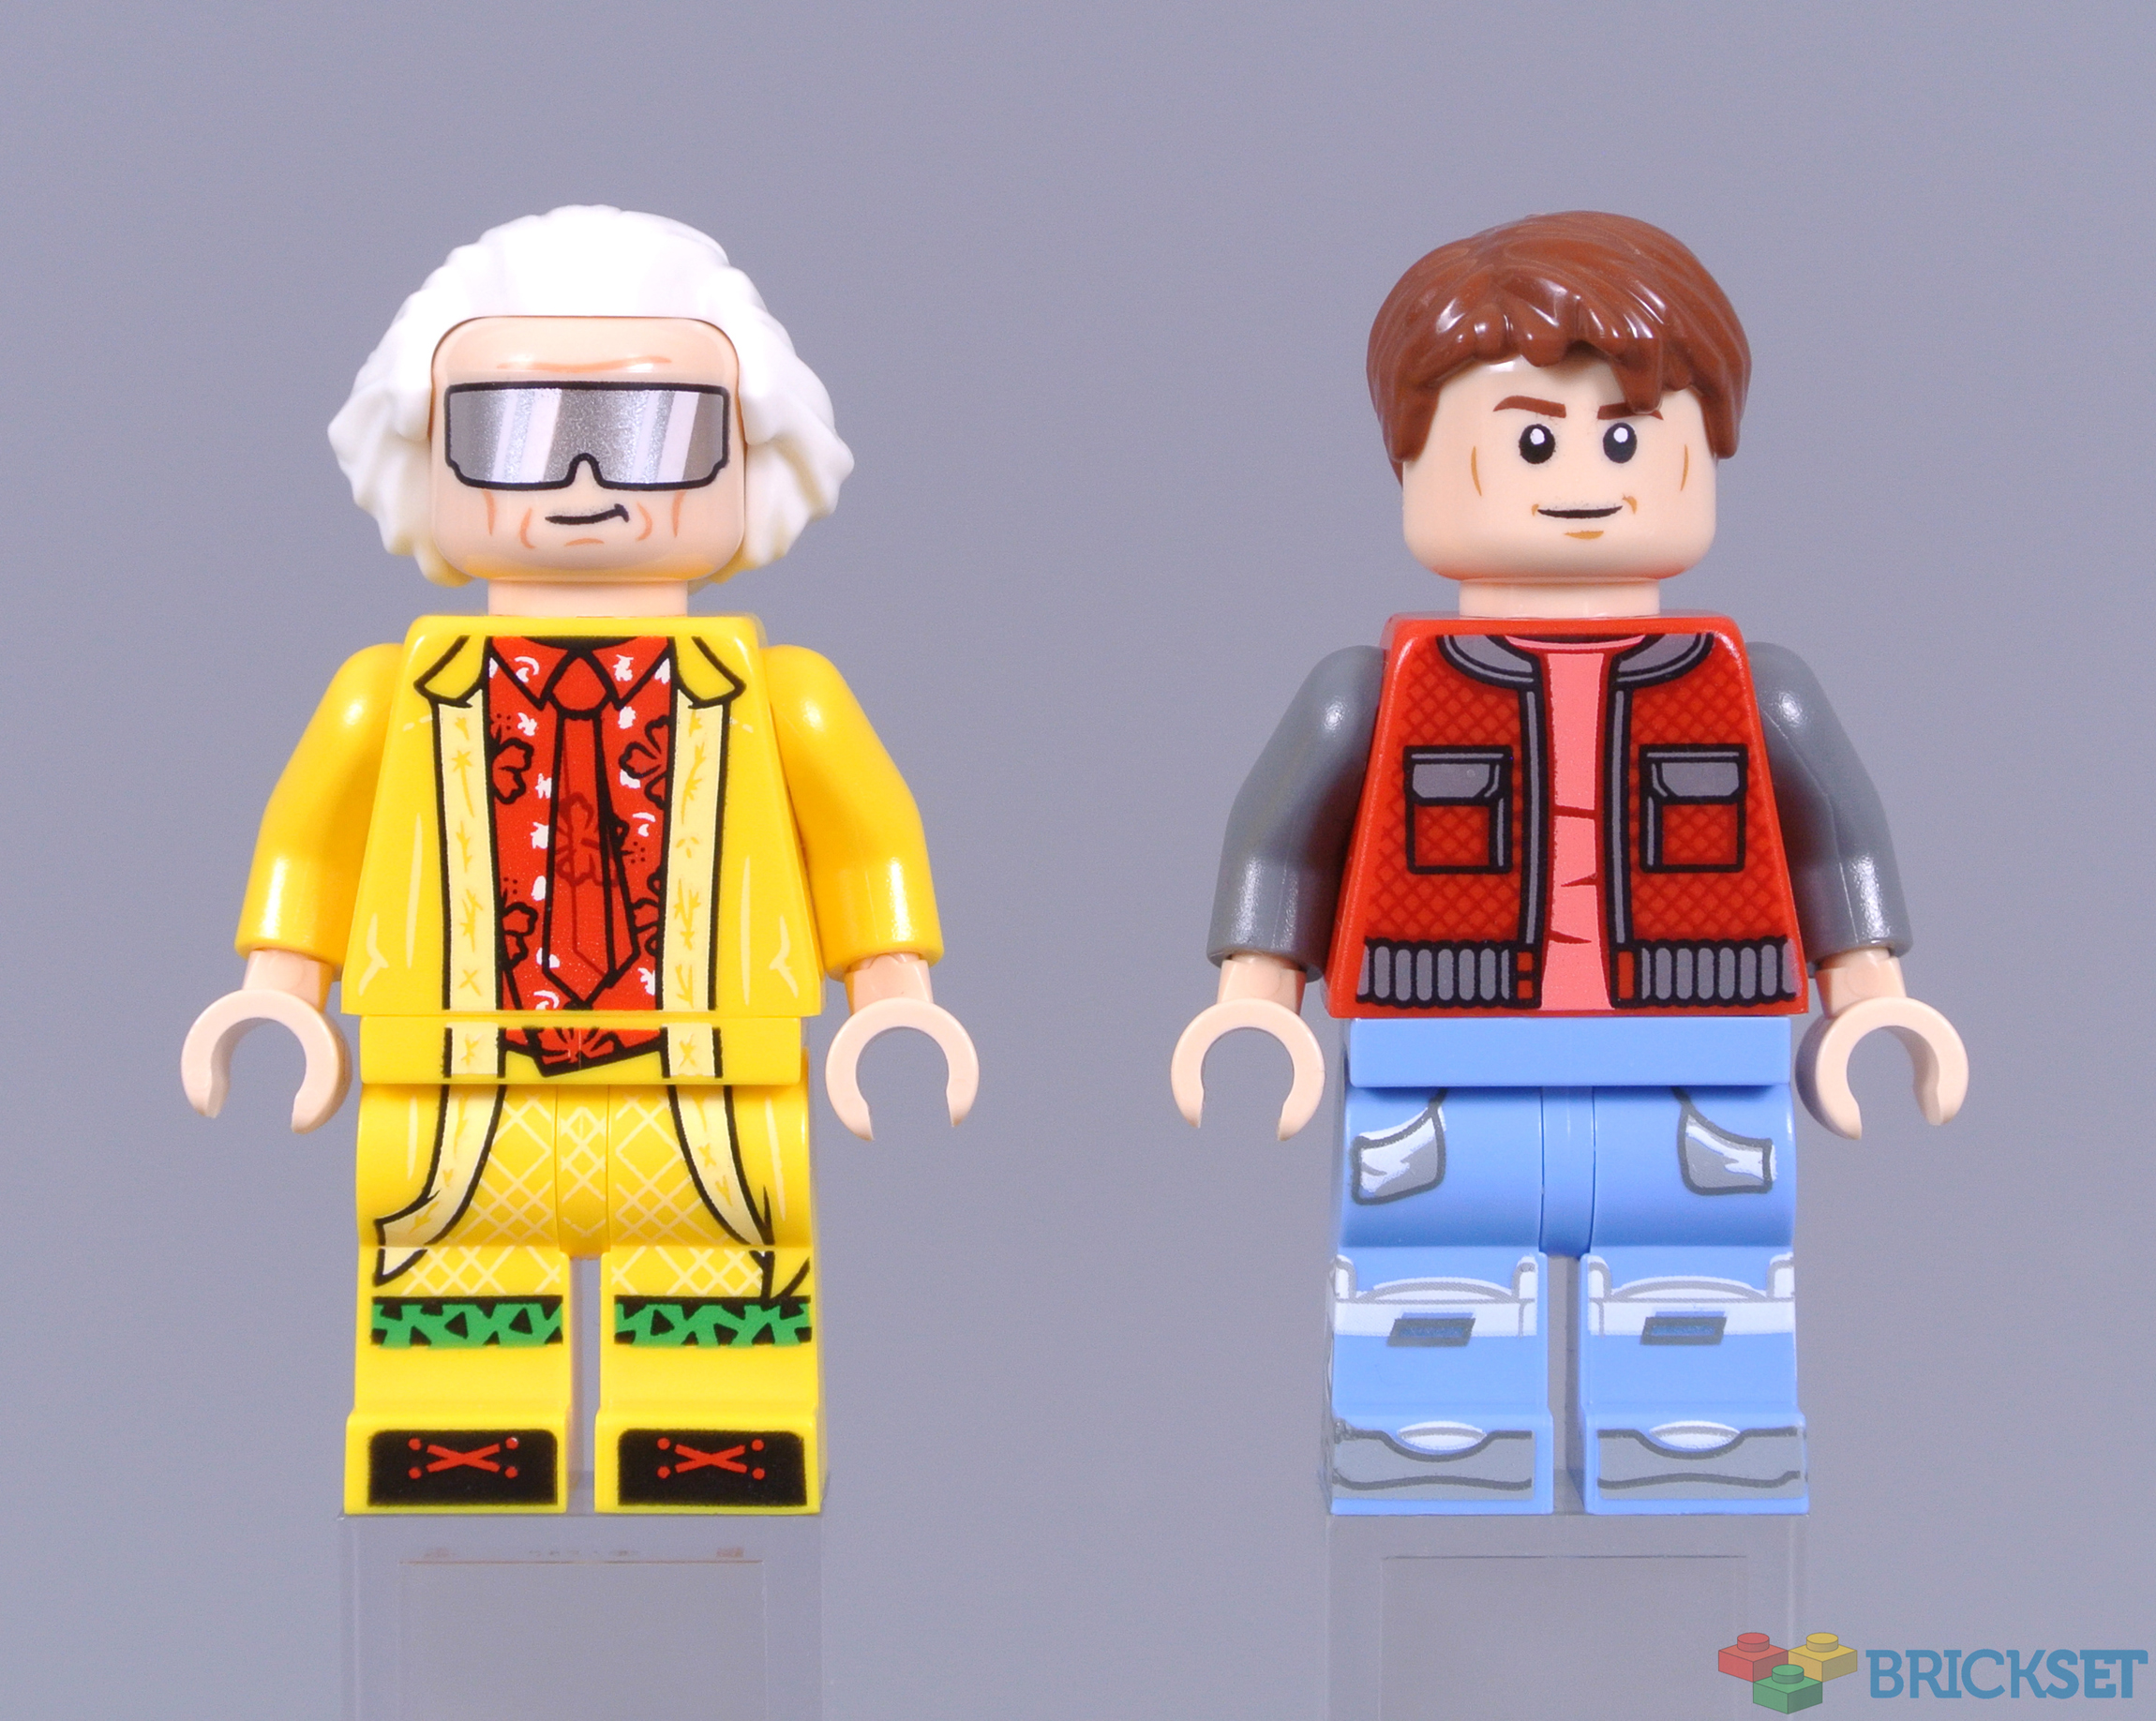 LEGO - 10300 Back To The Future Marty McFly & Doc Brown Minifigures set NEW